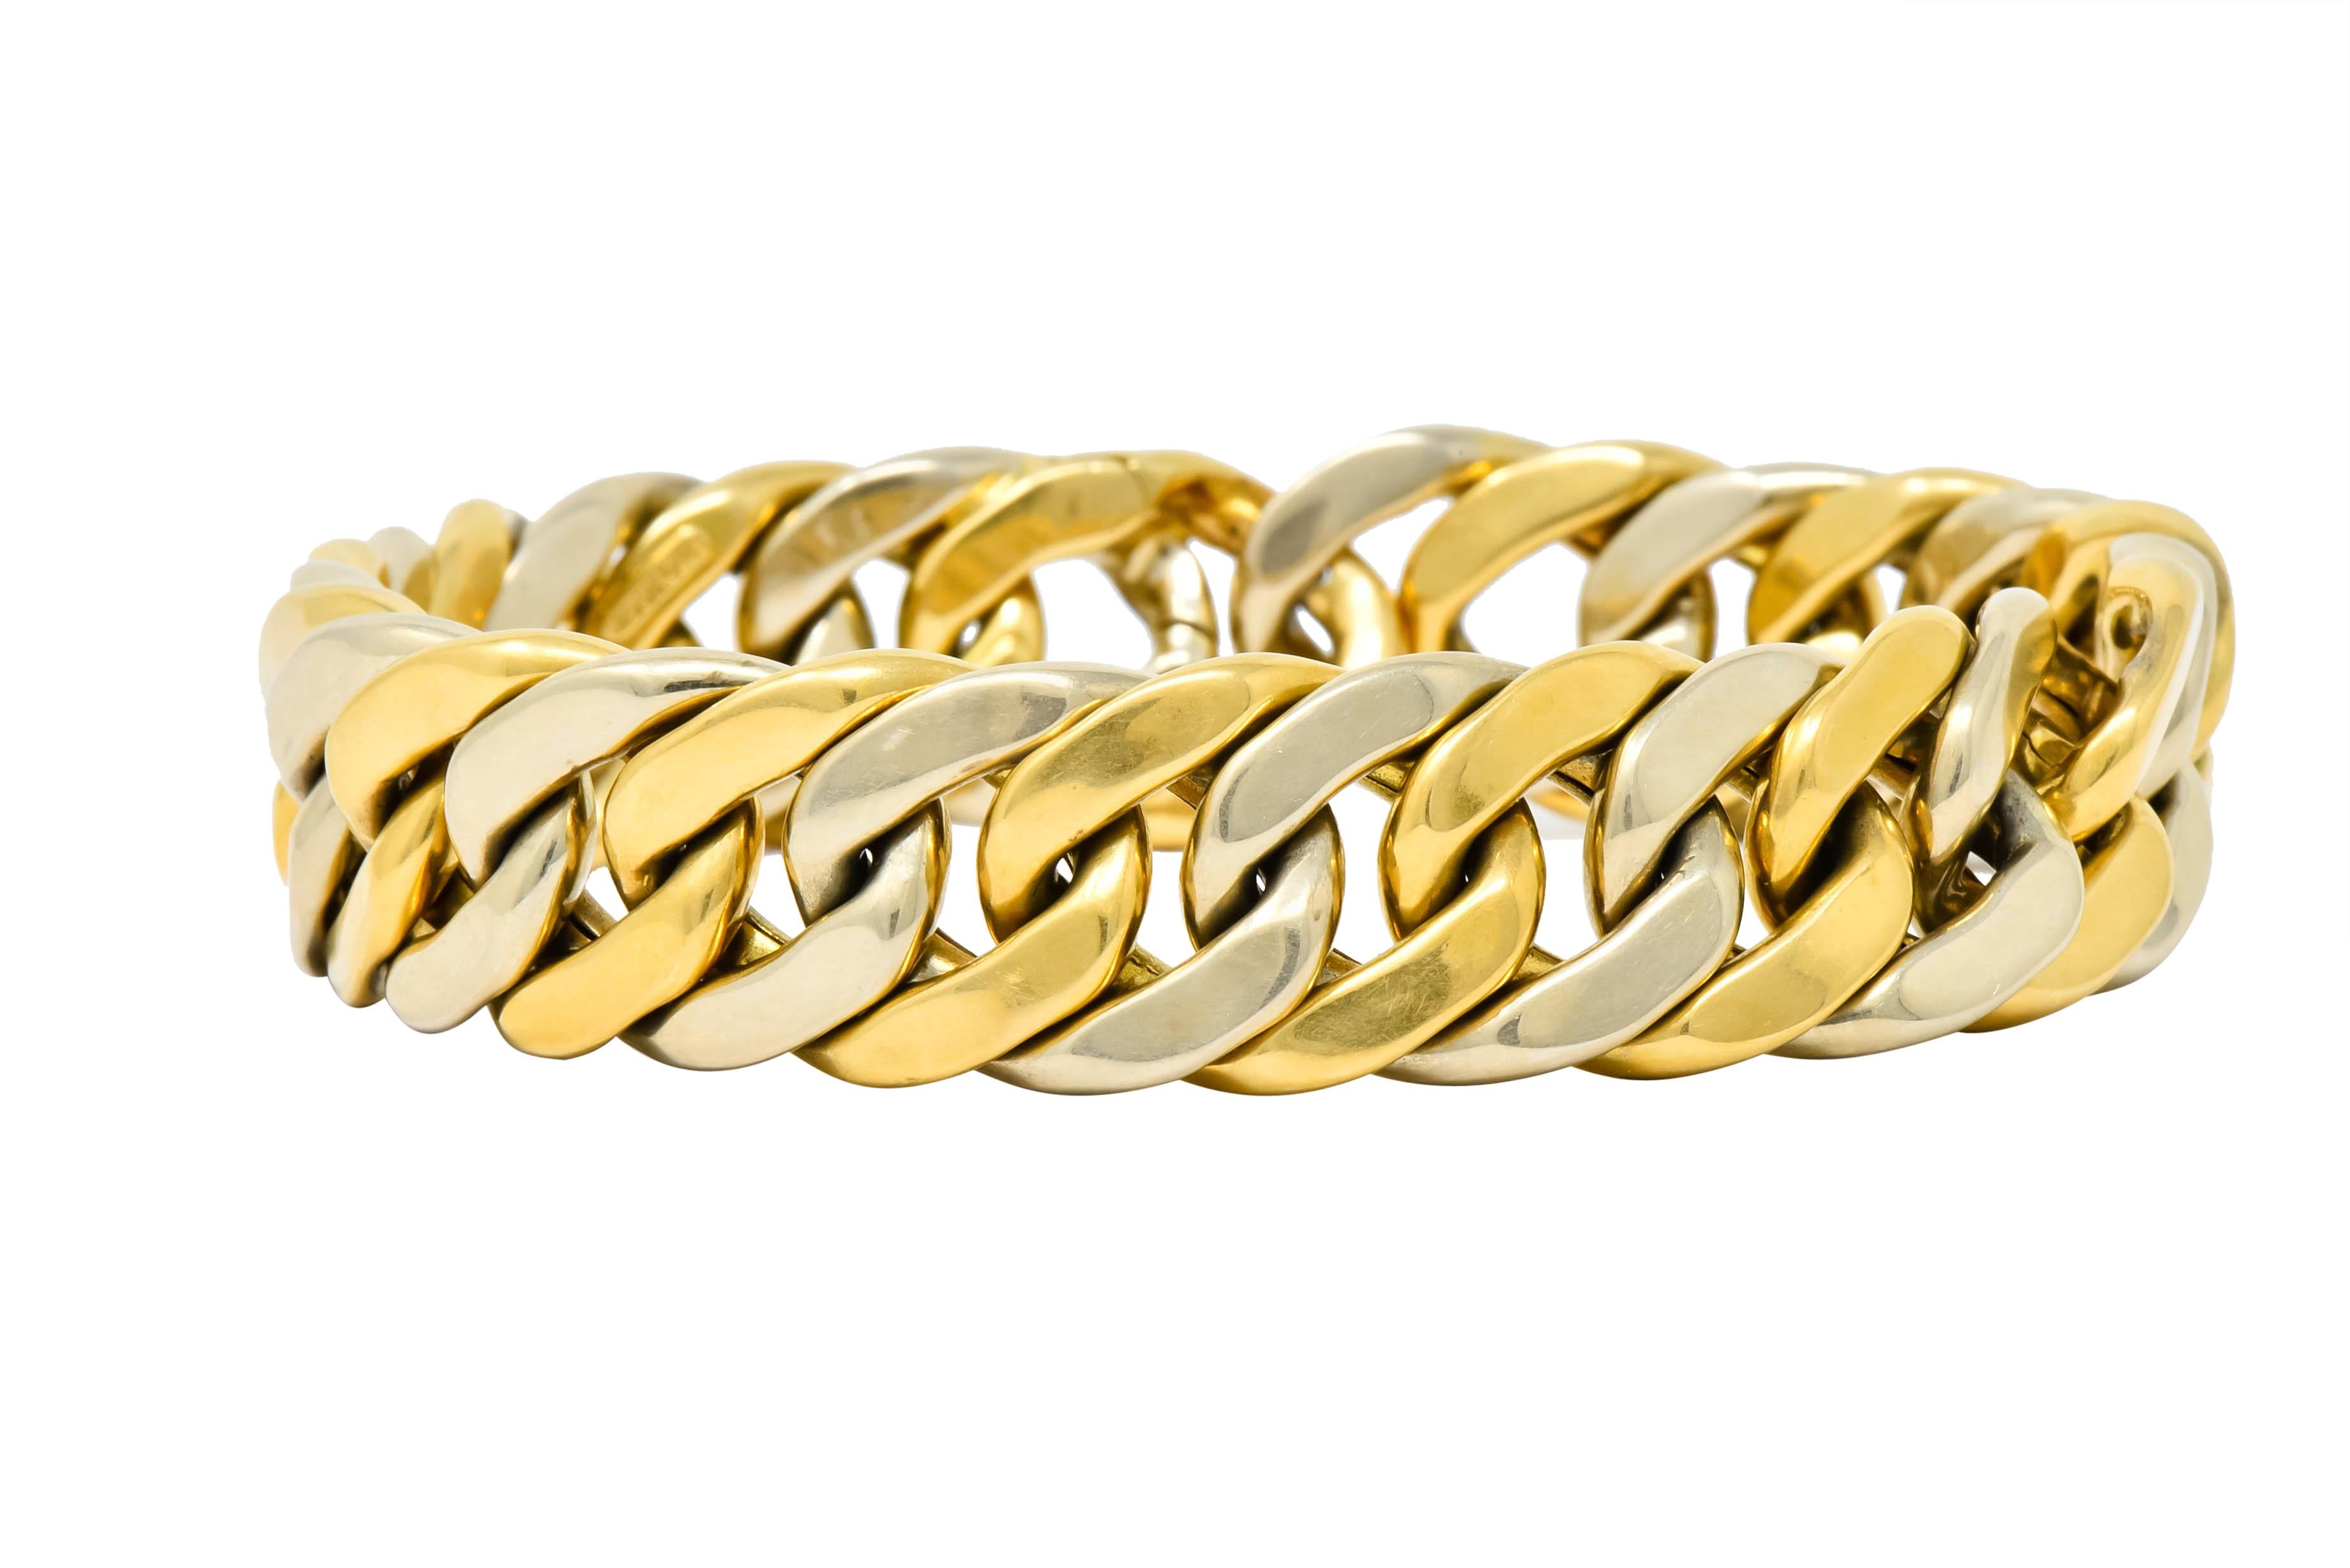 Bracelet comprised of hollow, curbed links alternating white and yellow gold 

With a high polished finish

Completed by concealed hinged clasp 

Signed Weingrill with assay marks for Verona and Missiaglia Italy and maker's mark for Carlo Weingrill